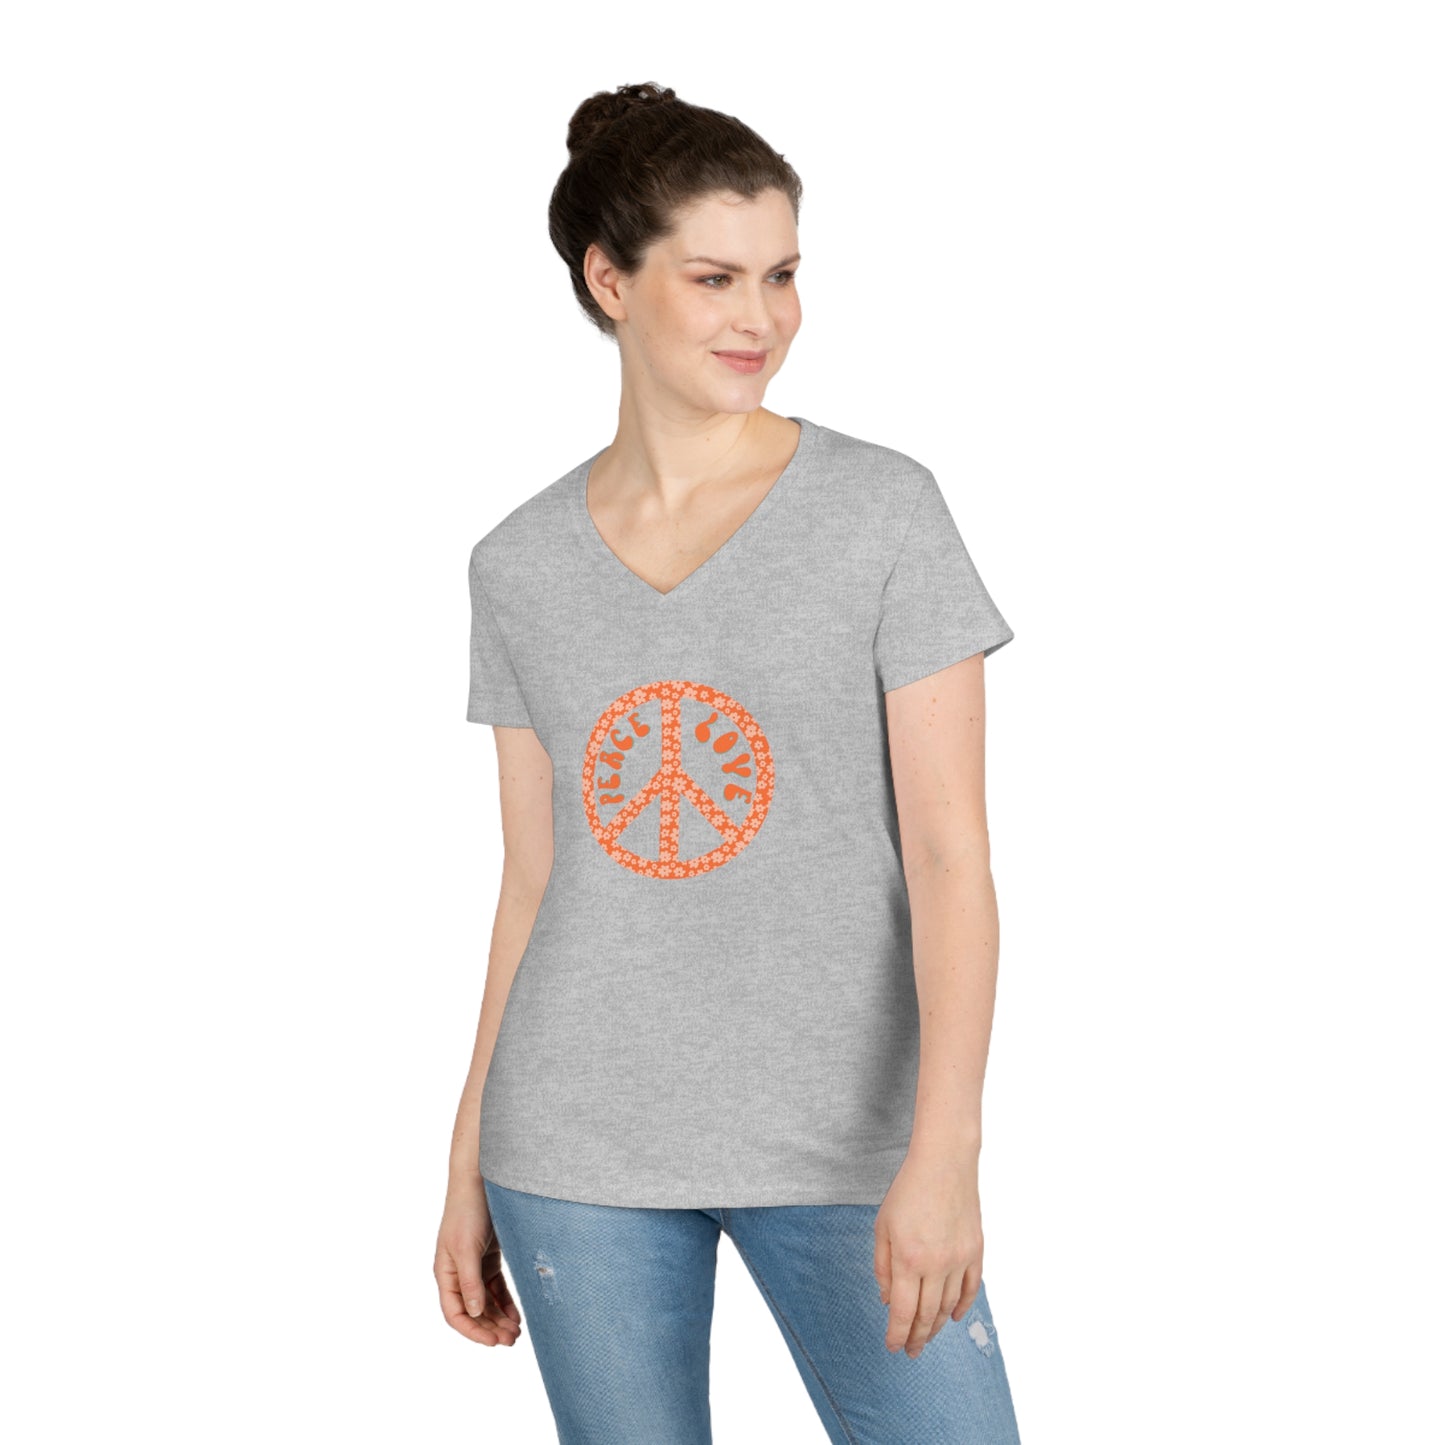 Groovy Words | Peace and Love | Ladies' Cotton V-Neck T-Shirt